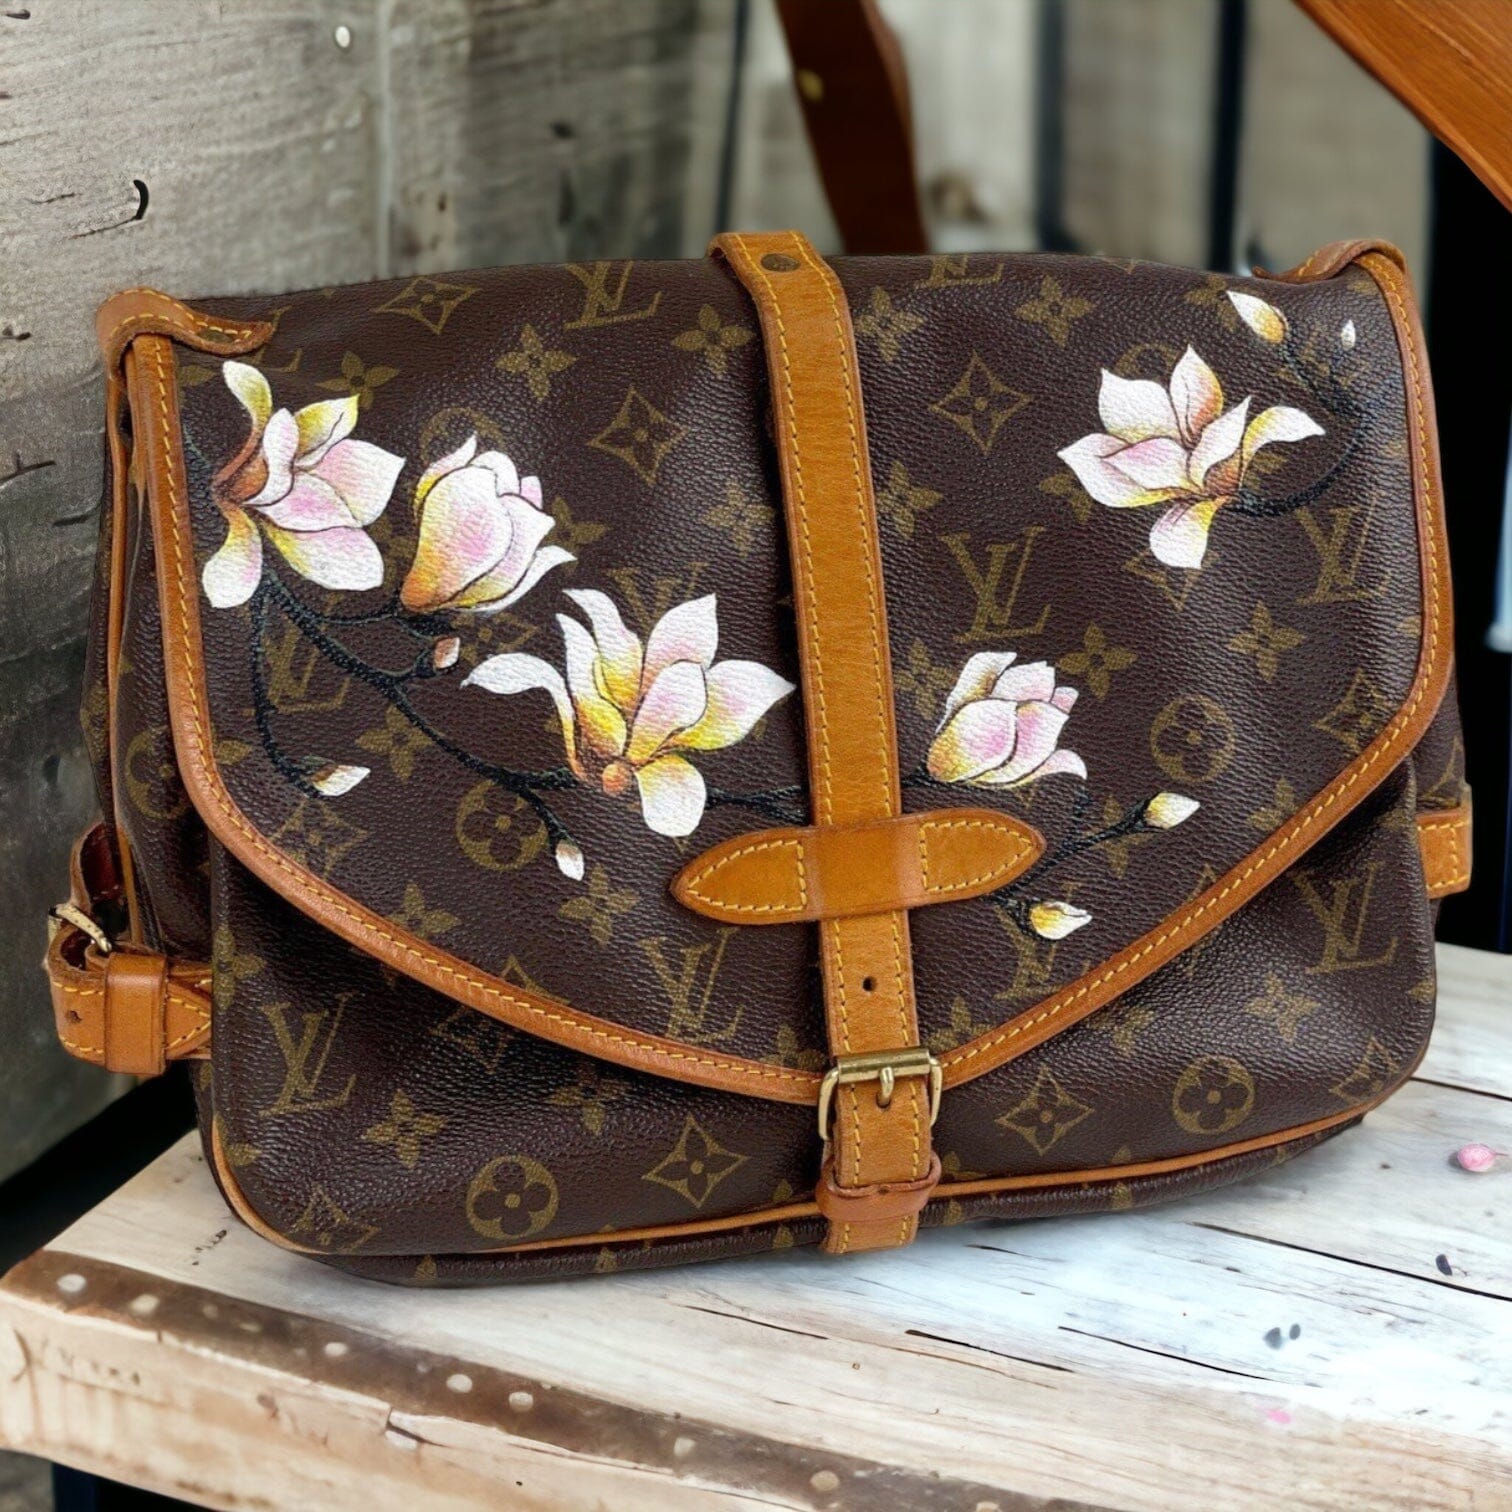 Louis Vuitton Saumur Women's Authentic Pre Owned Custom Painted Crossbody Bag Adjustable Strap Brown, Yellow Luxury Monogram Canvas